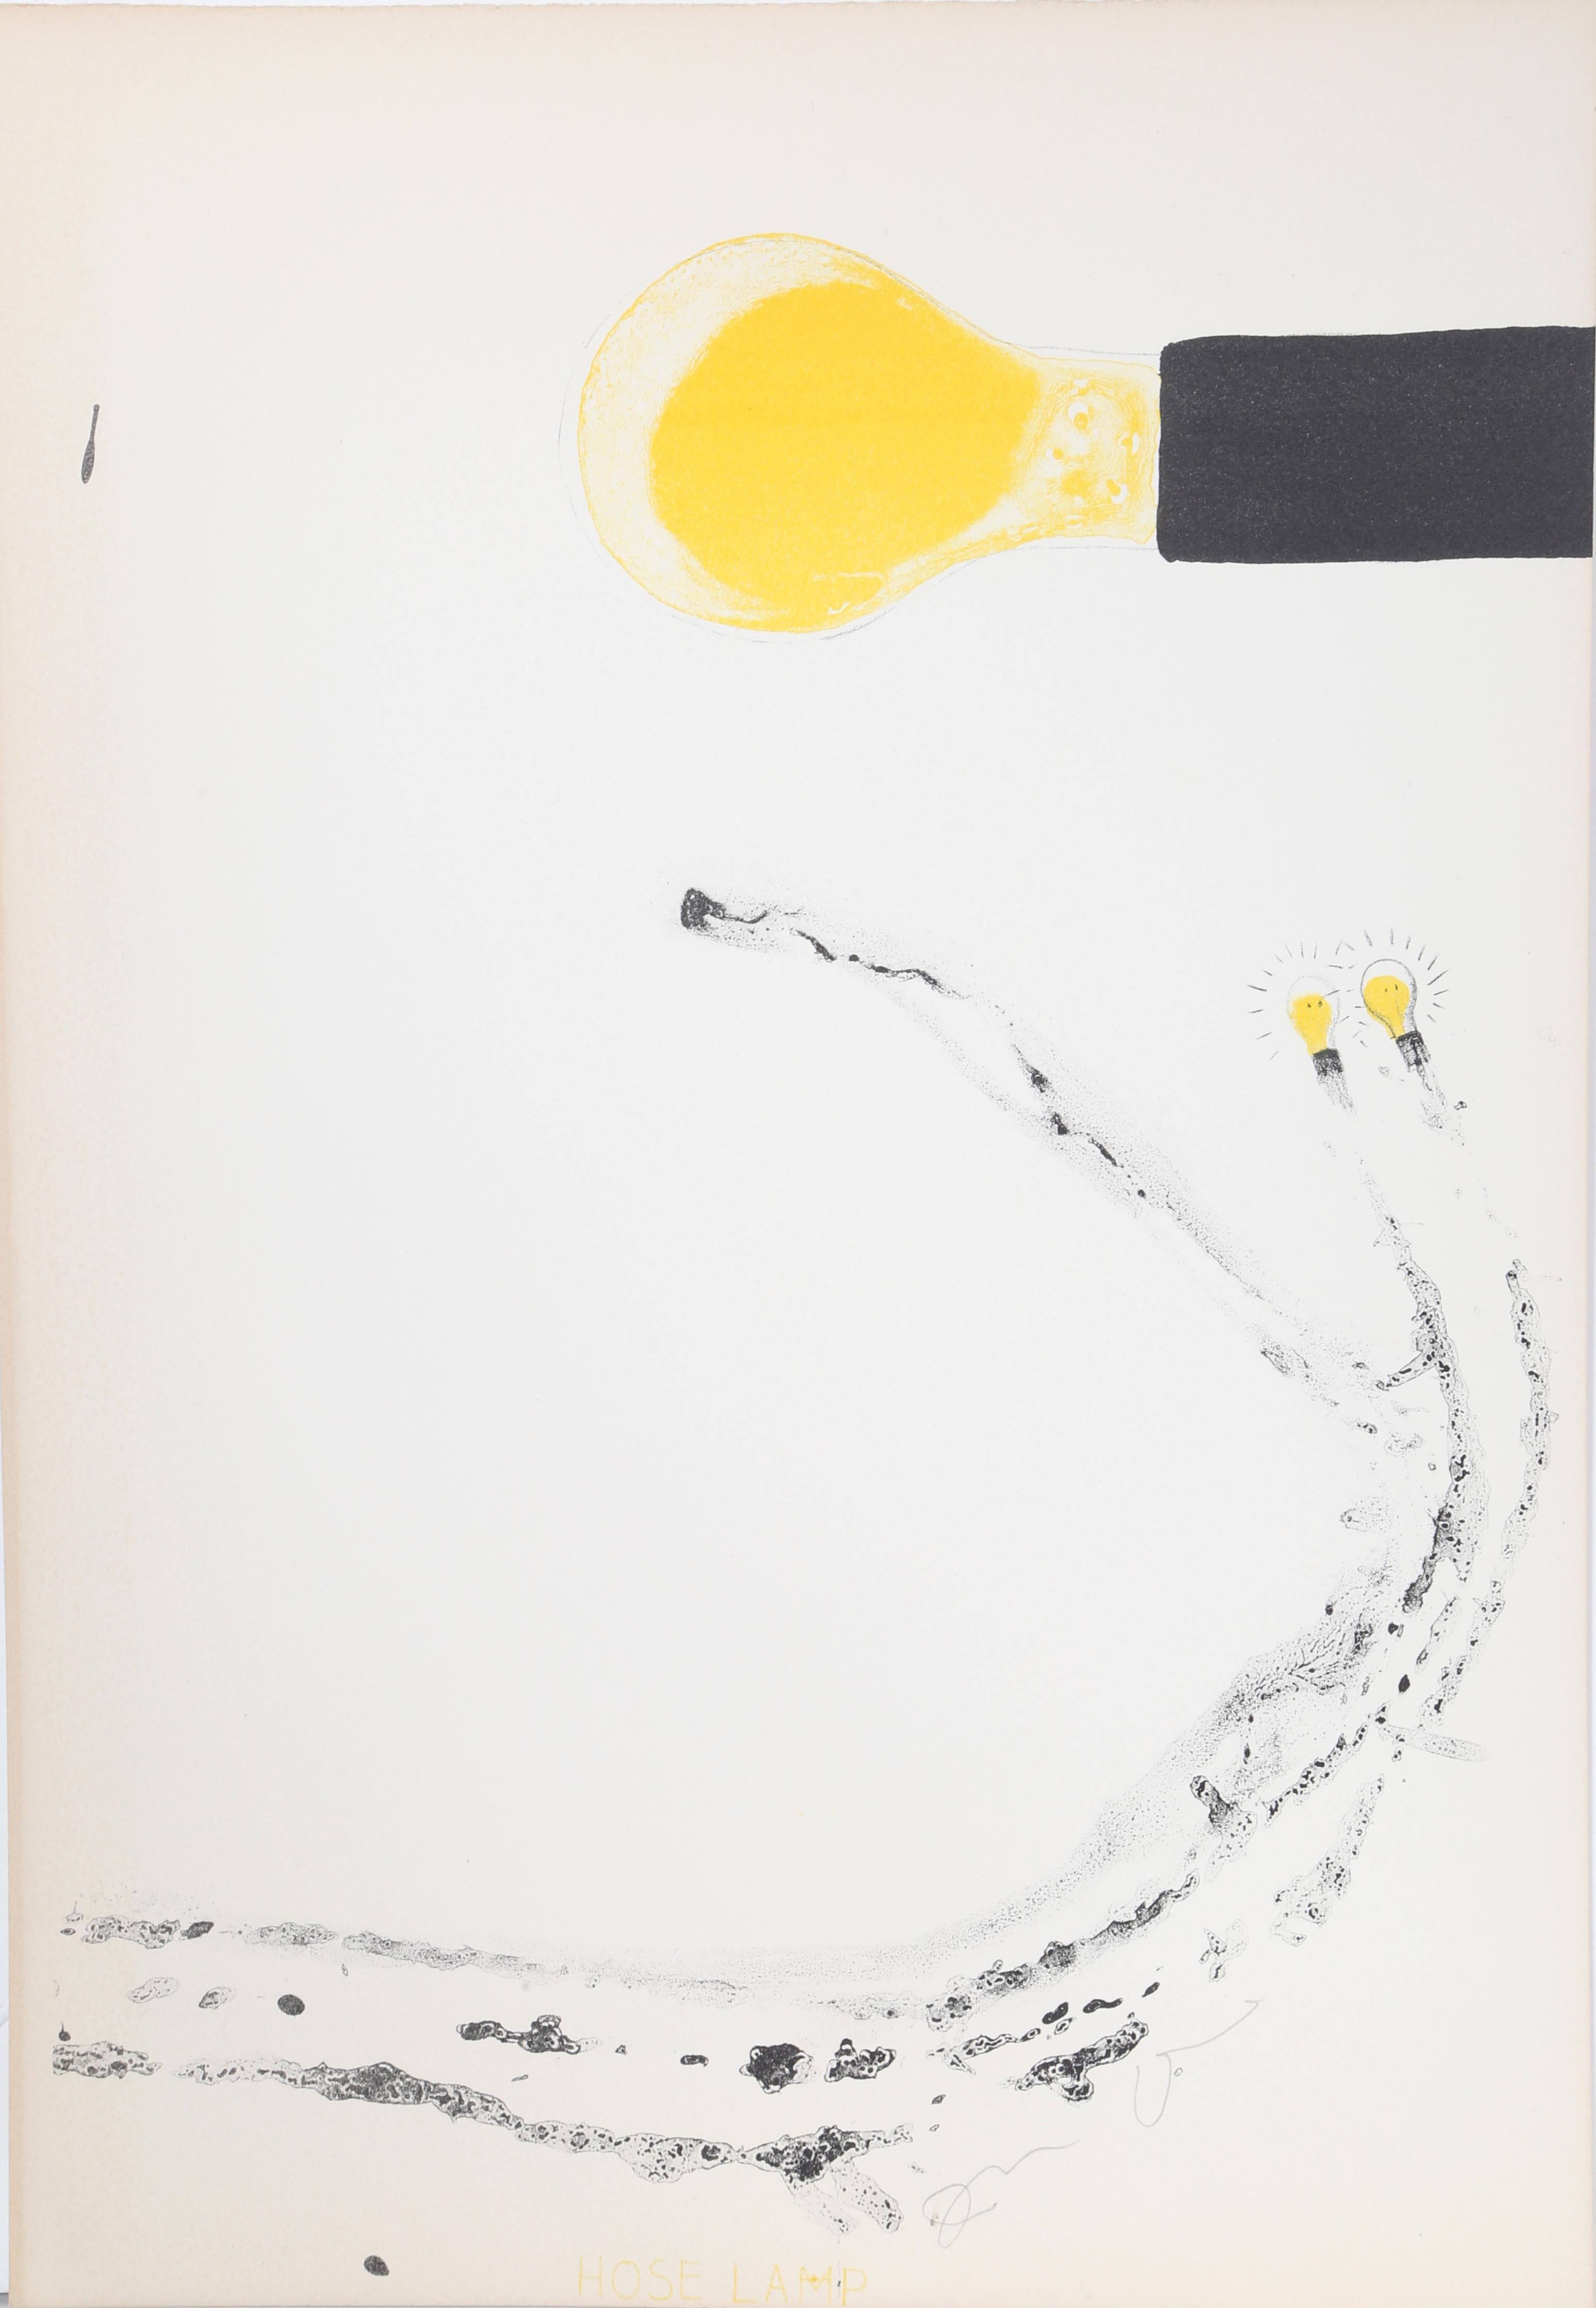 An abstract composition of several long black lines that end with a bright yellow bulb. In the upper right is a more detailed view of one of the bulbs. This lithograph is signed in pencil by the artist.

Hose Lamp
Jim Dine, American (1935)
Date: